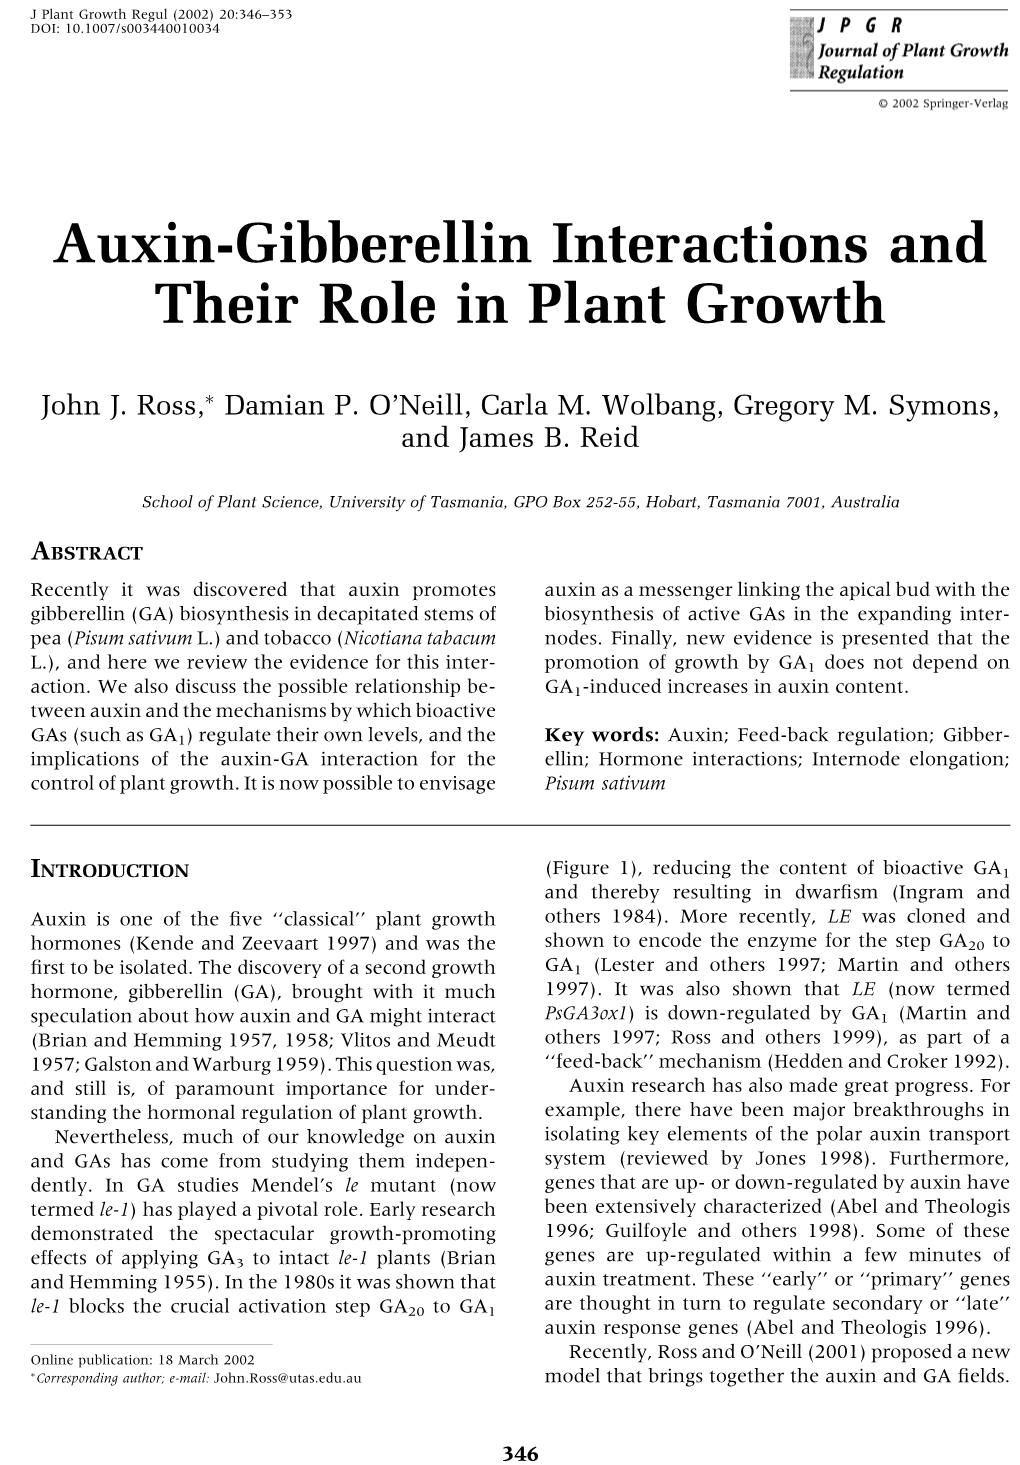 Auxin-Gibberellin Interactions and Their Role in Plant Growth